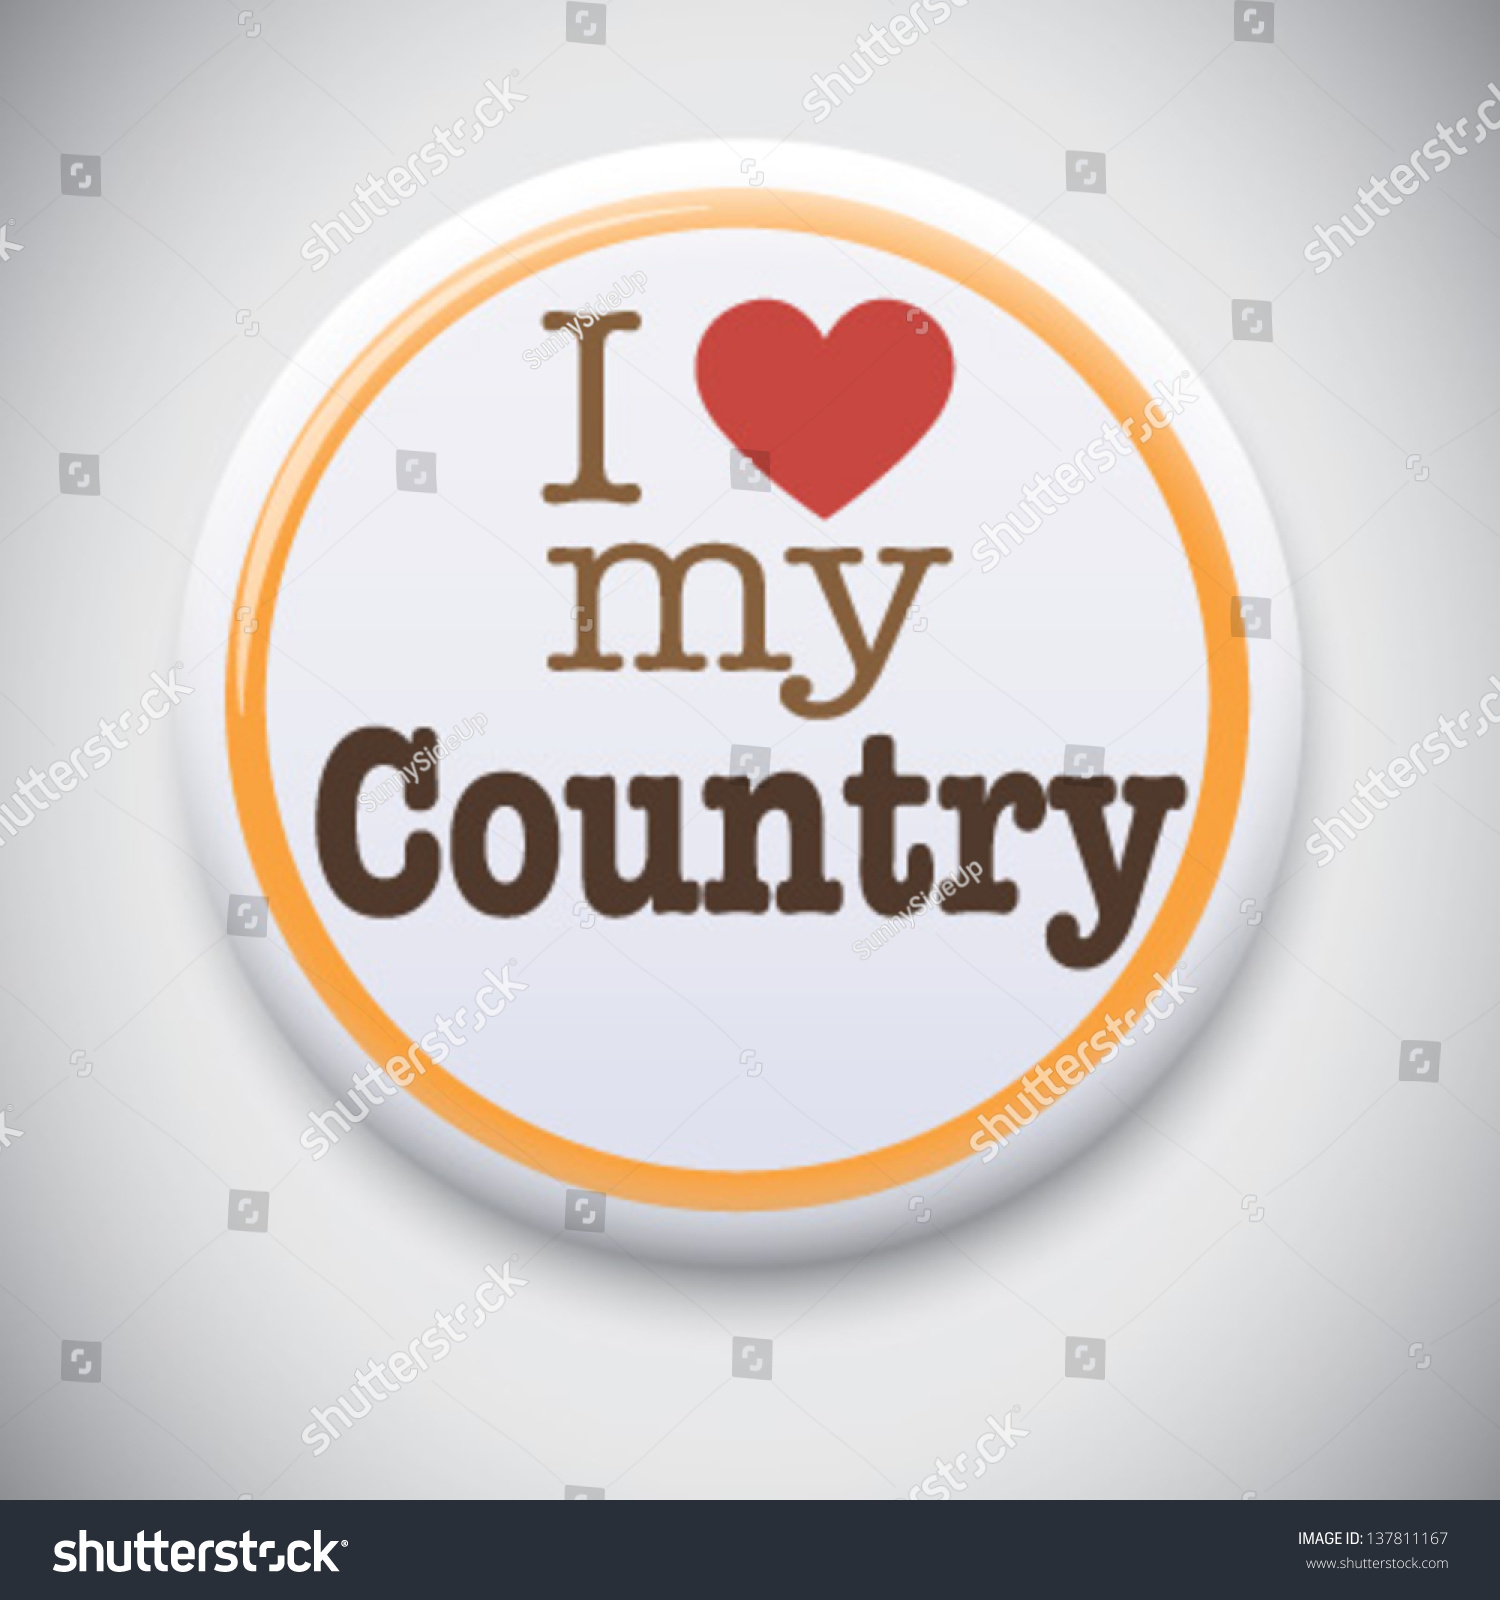 I Love My Country - Vector Pin / Button Badge - 137811167 : Shutterstock